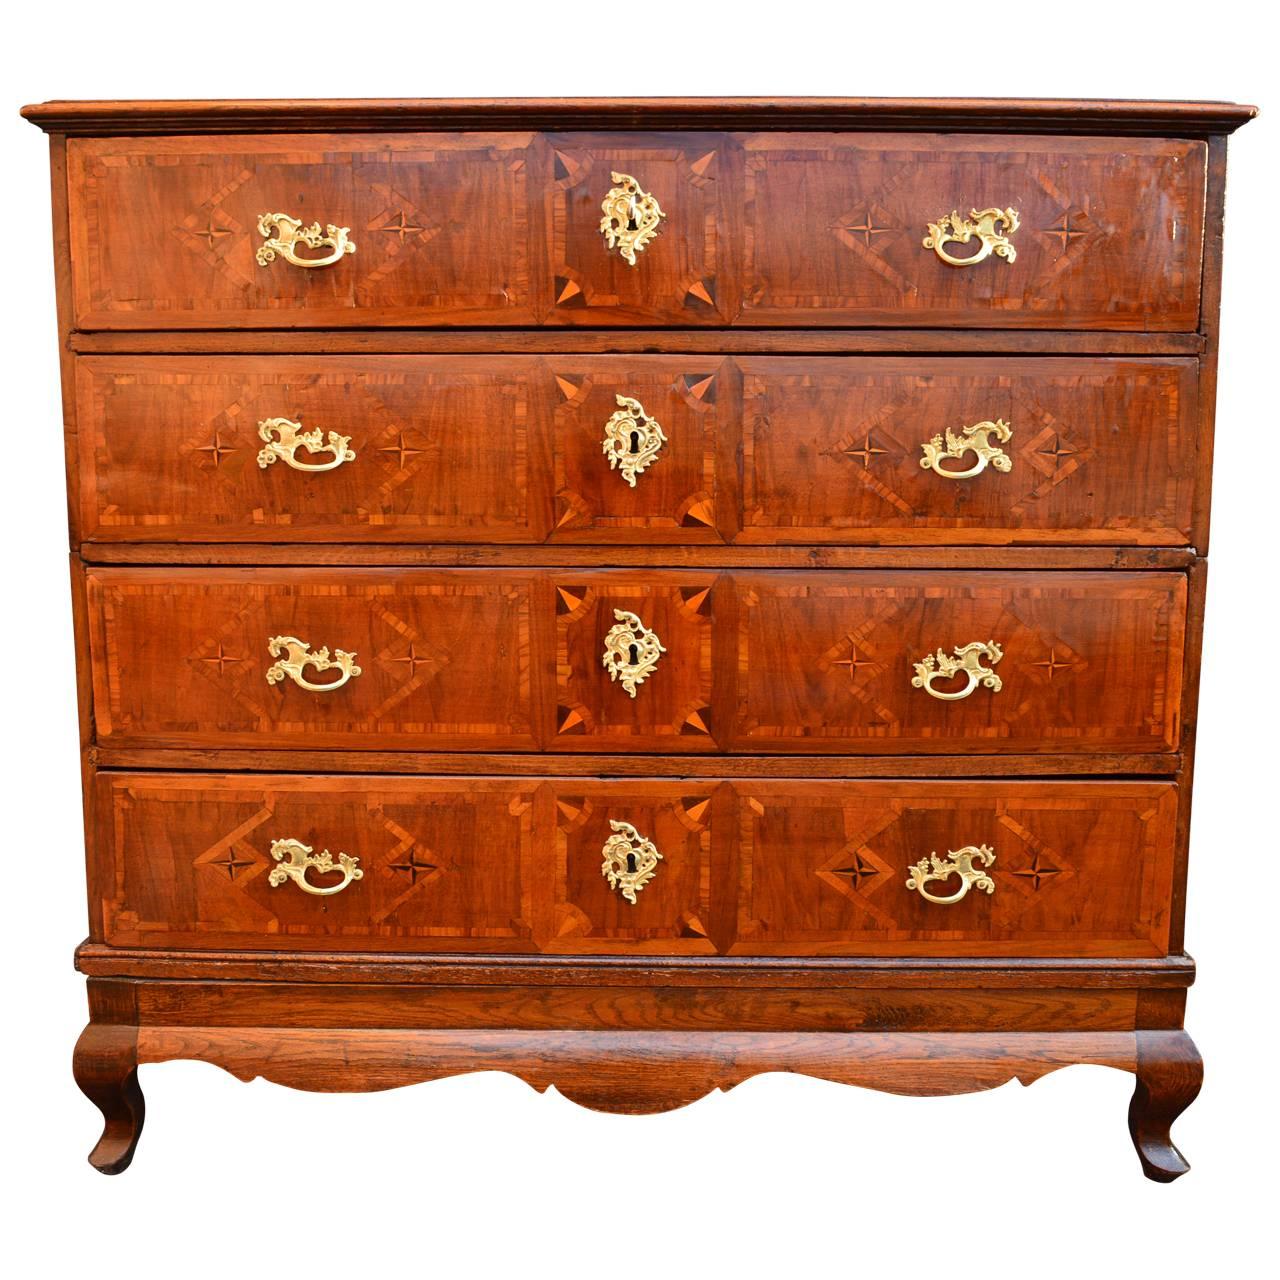 Danish Baroque dresser with four drawers, period brass hardware and key. Inlaid fruitwood decorations, sharp intarsia work.